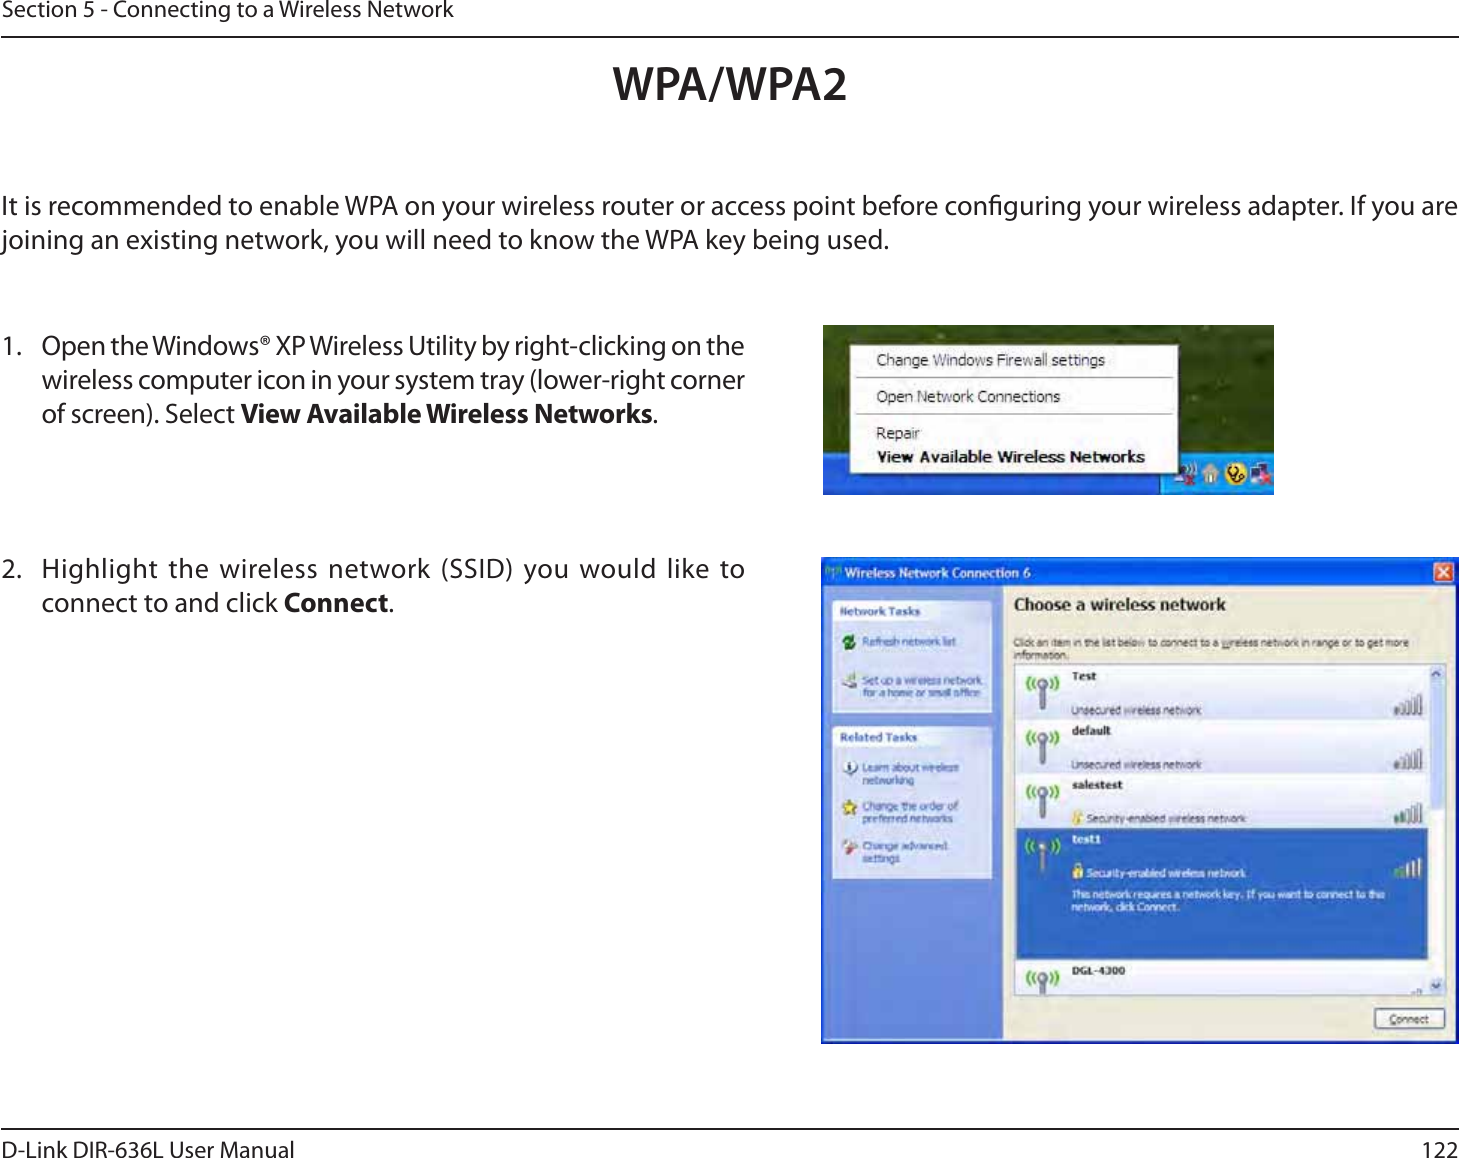 122D-Link DIR-636L User ManualSection 5 - Connecting to a Wireless NetworkIt is recommended to enable WPA on your wireless router or access point before conguring your wireless adapter. If you are joining an existing network, you will need to know the WPA key being used.2.  Highlight the wireless network (SSID) you would like to connect to and click Connect.1.  Open the Windows® XP Wireless Utility by right-clicking on the wireless computer icon in your system tray (lower-right corner of screen). Select View Available Wireless Networks. WPA/WPA2